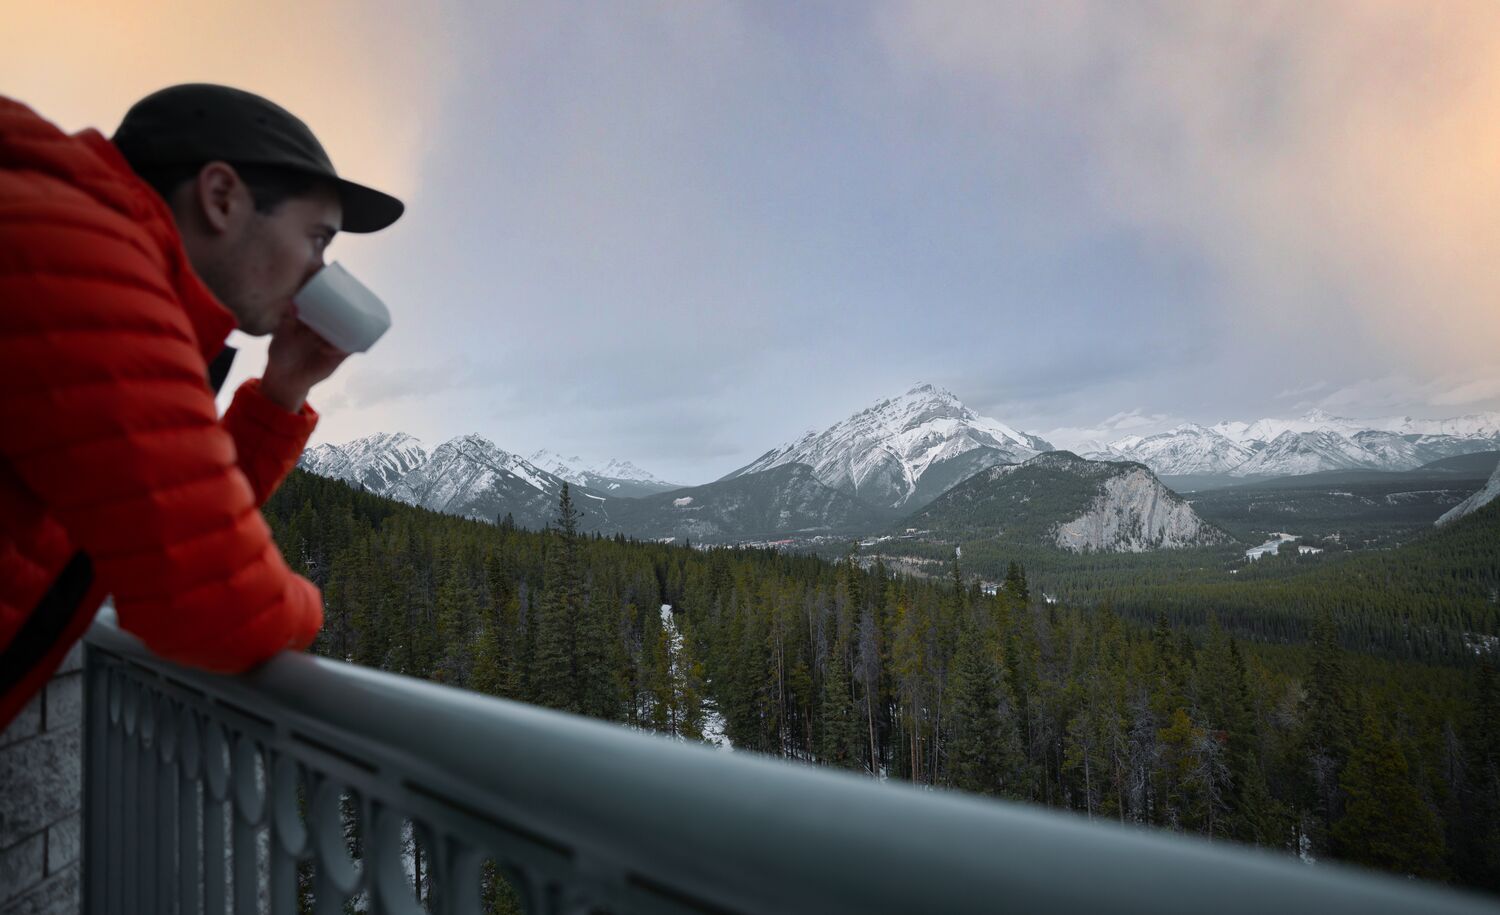 A person enjoys a coffee at the rimrock Resort Hotel in the early morning while looking at mountains.